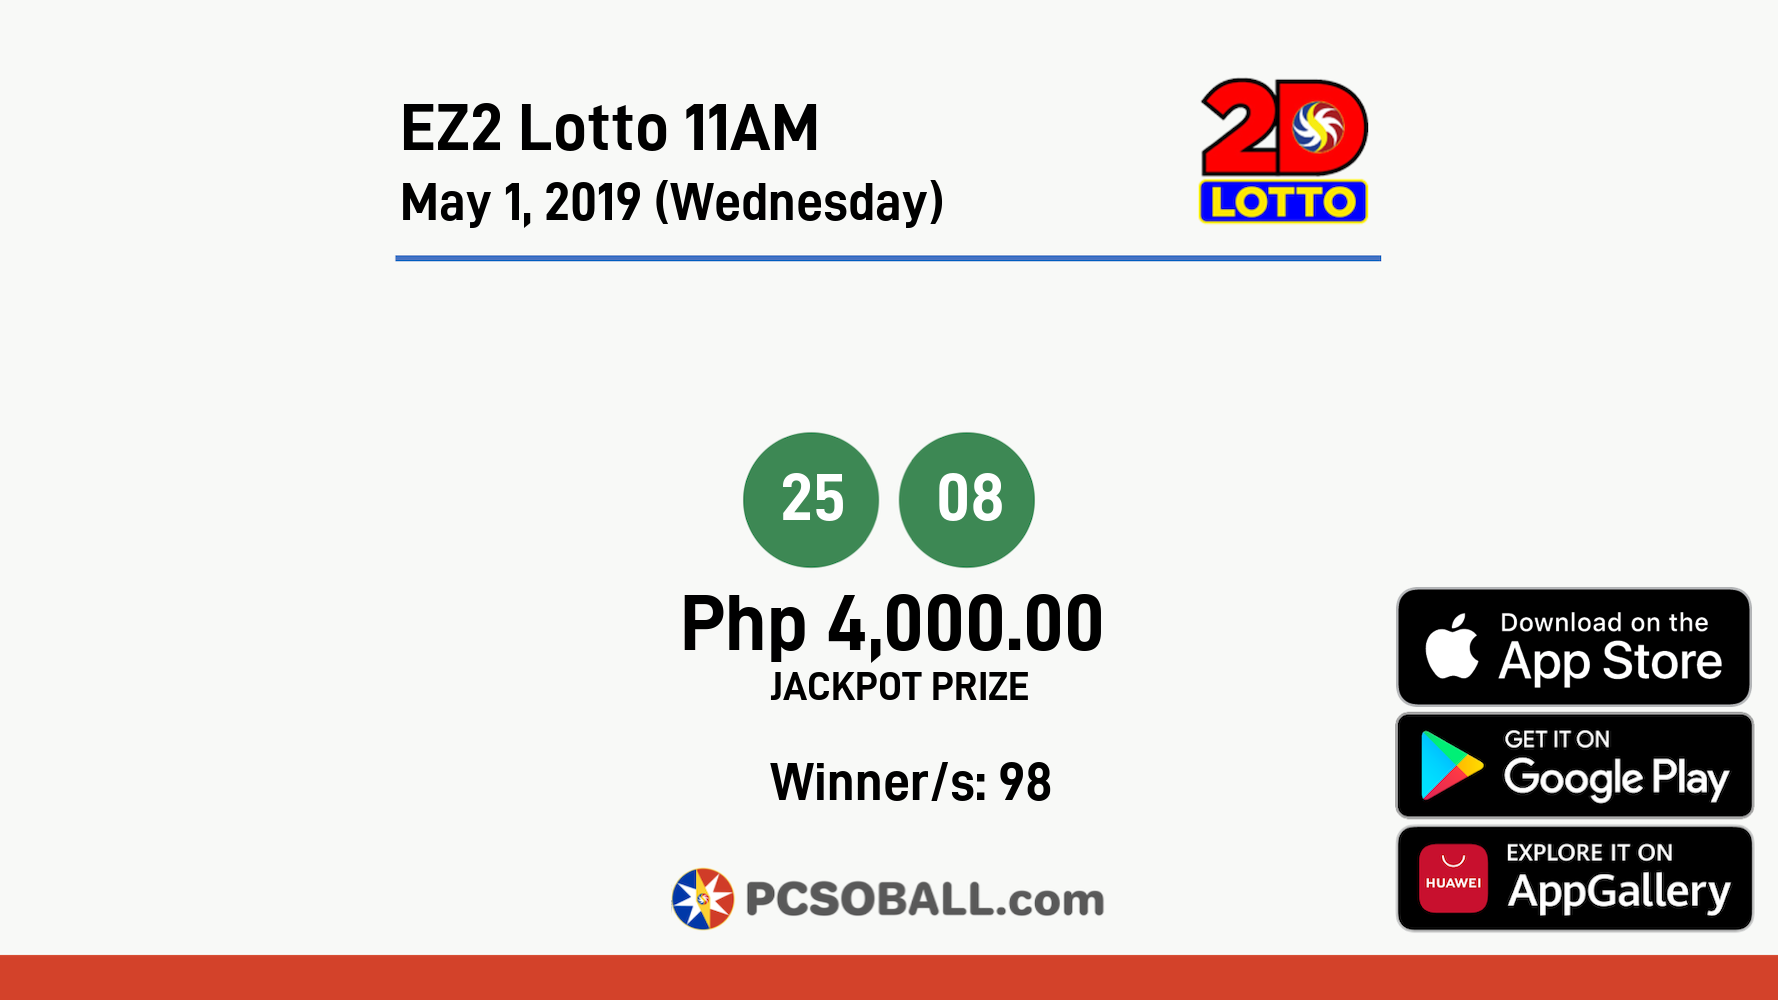 EZ2 Lotto 11AM May 1, 2019 (Wednesday) Result